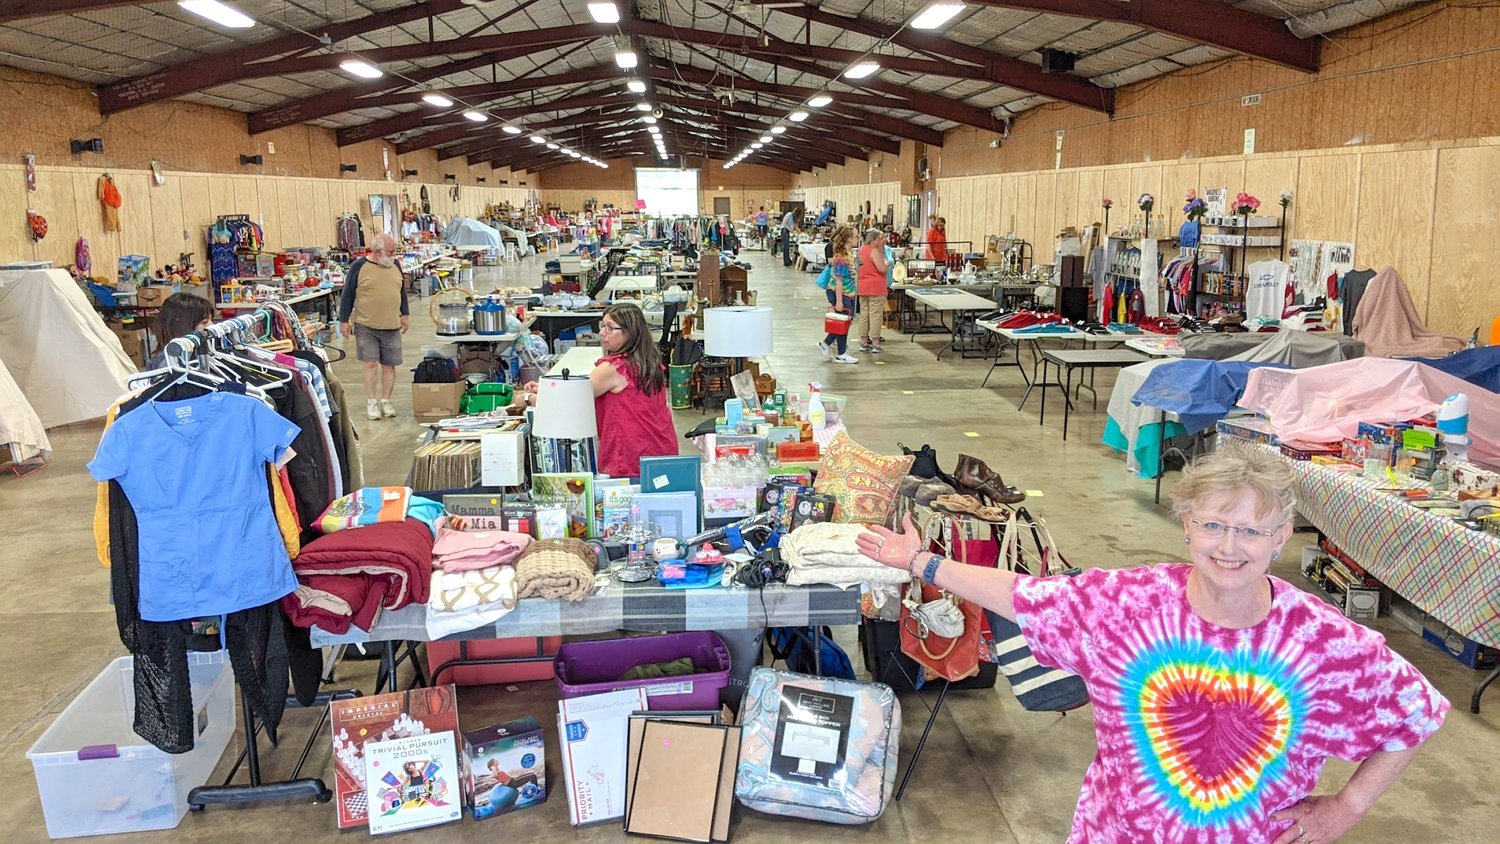 The World’s Largest Yard Sale will take place Saturday, June 4, at the Herkimer County Fairgrounds in Frankfort.